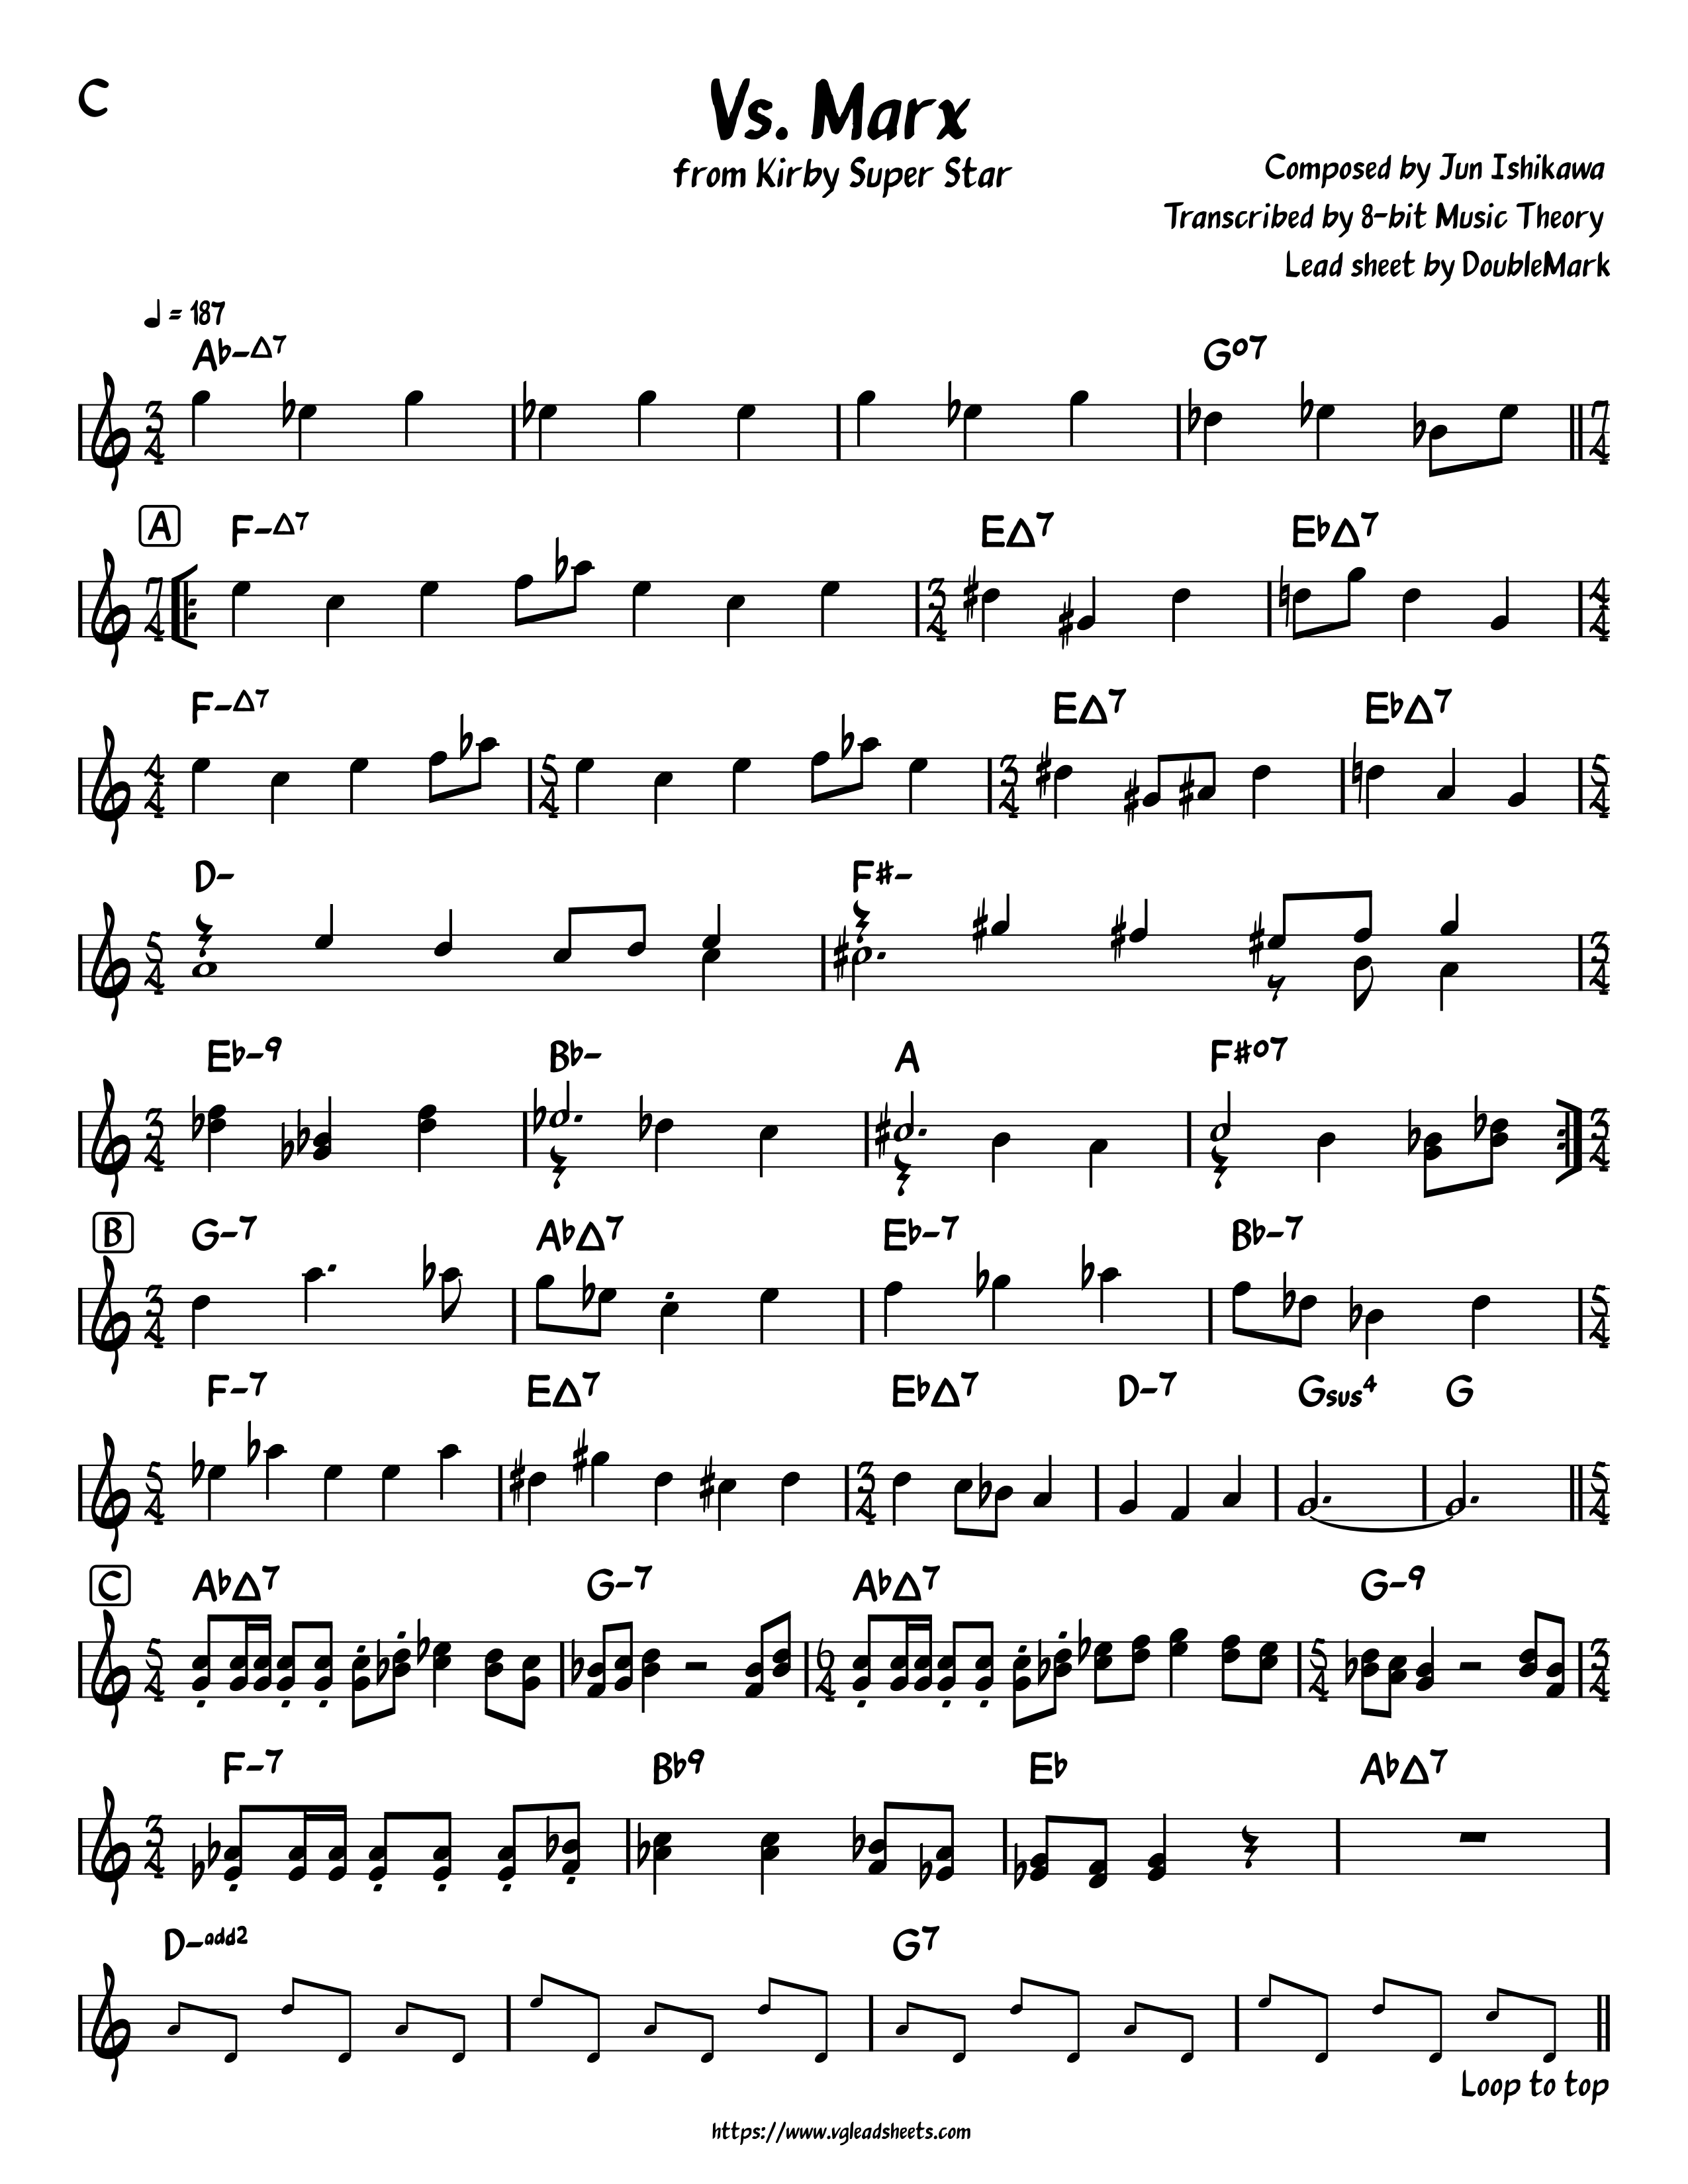 Kirby Super Star - Vs. Marx  - Lead Sheets for Video Game  Music